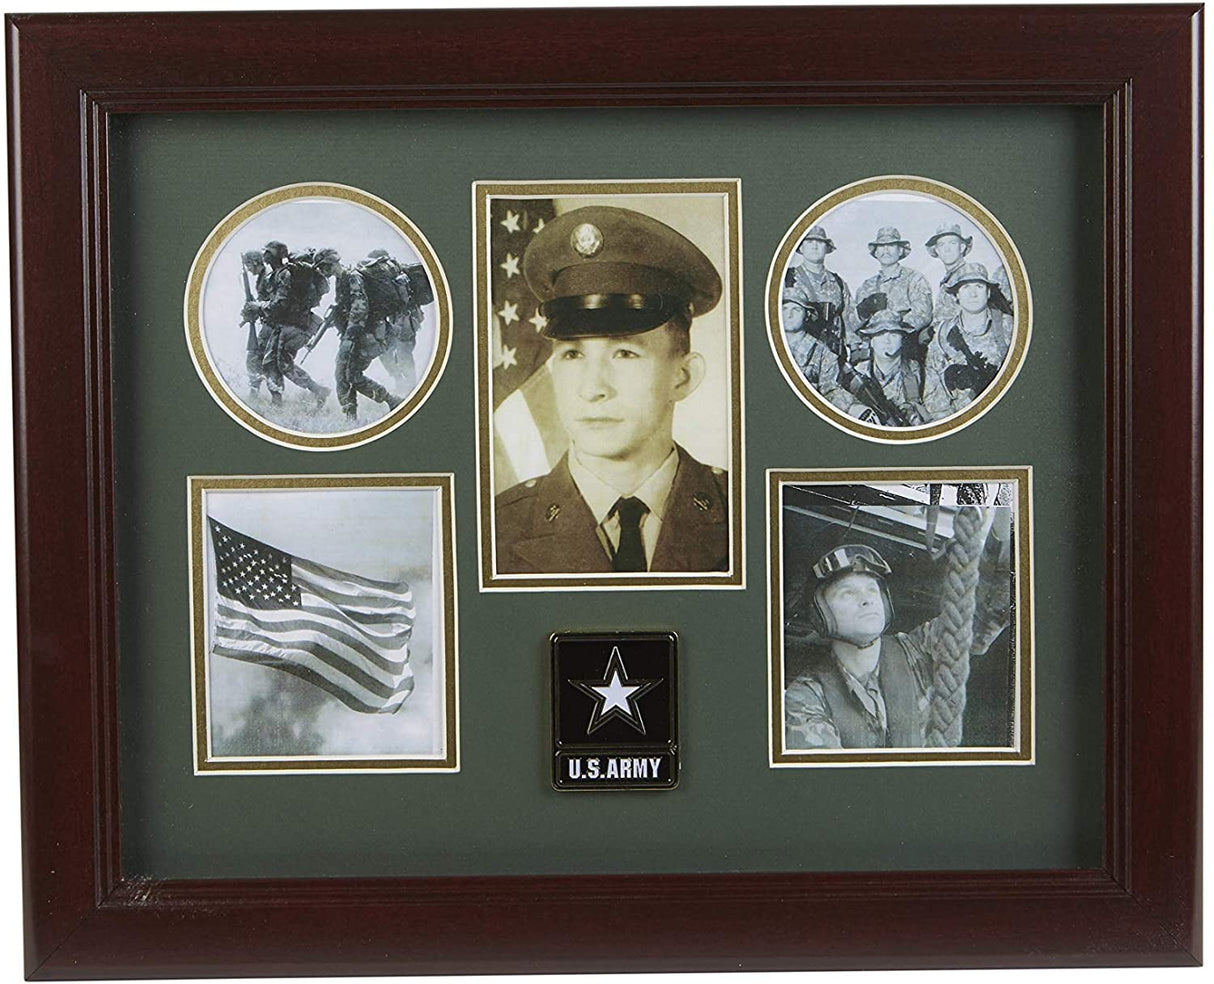 The Military Gift Store Products Frame Go Army Medallion 5-Picture Collage Frame.